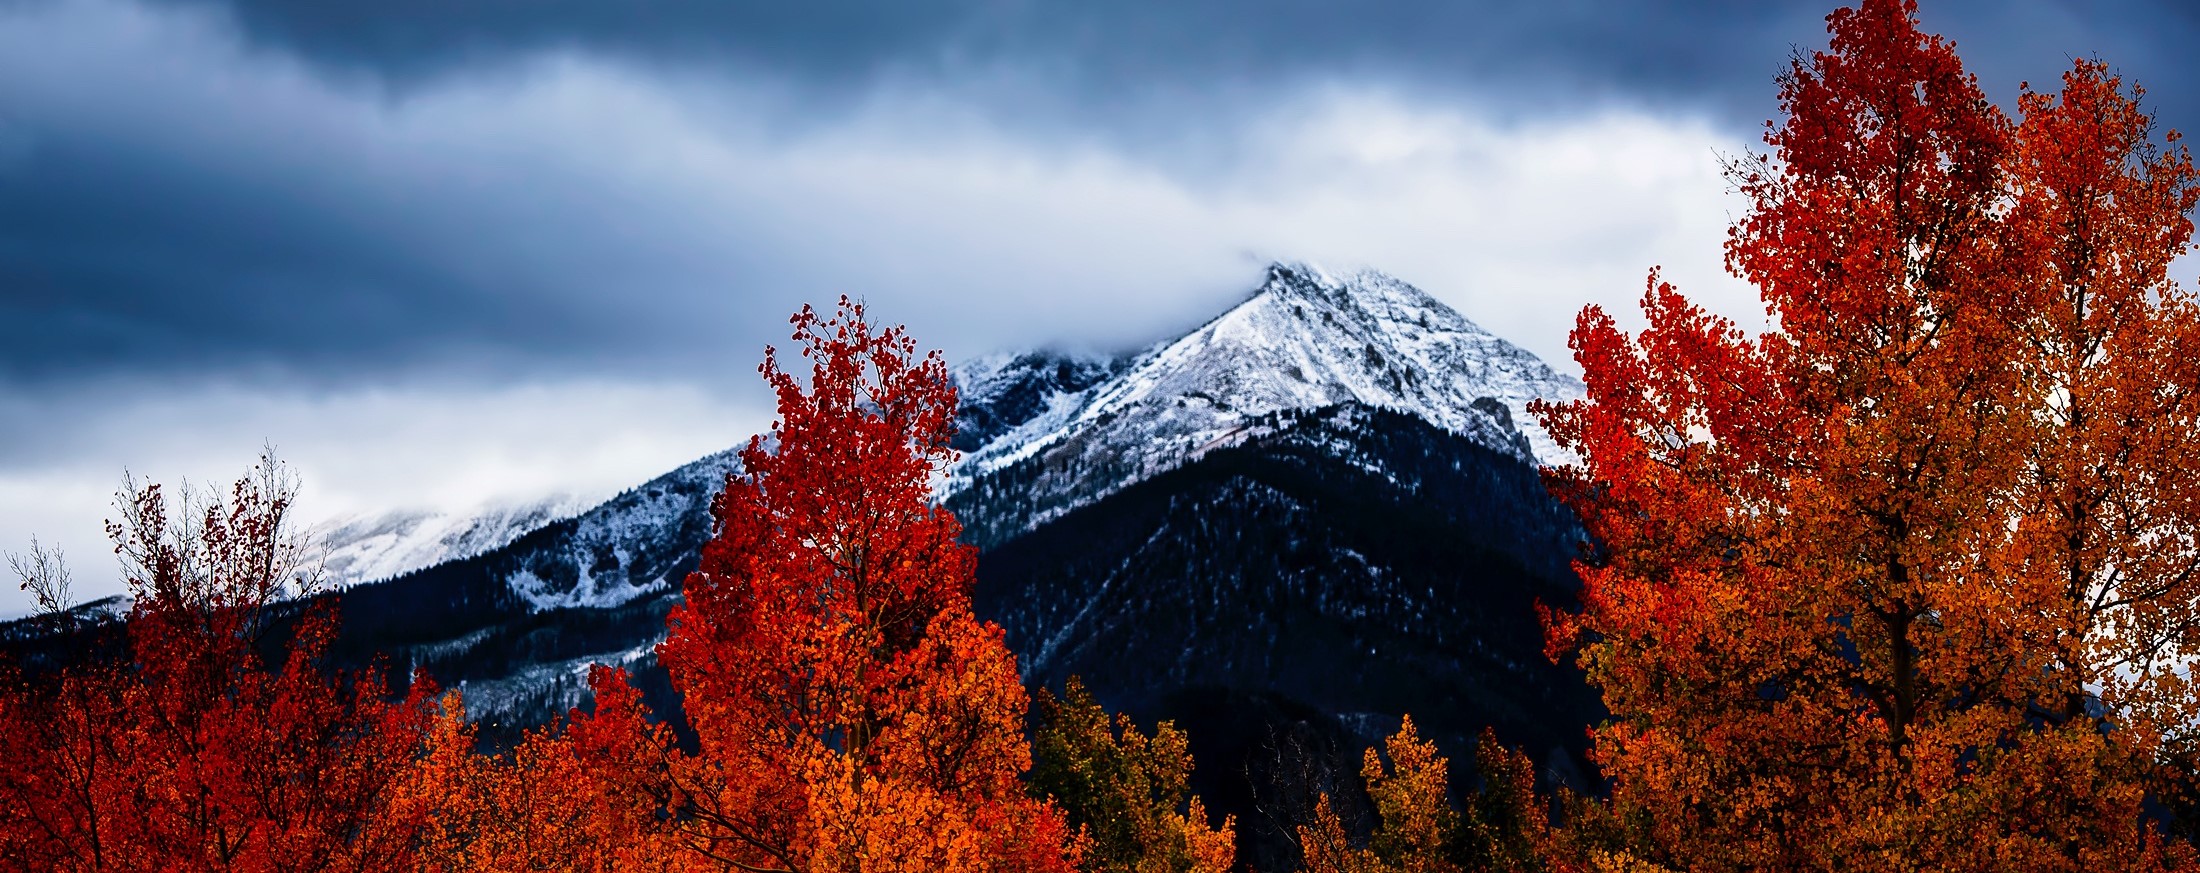 Red trees in front of a mountain